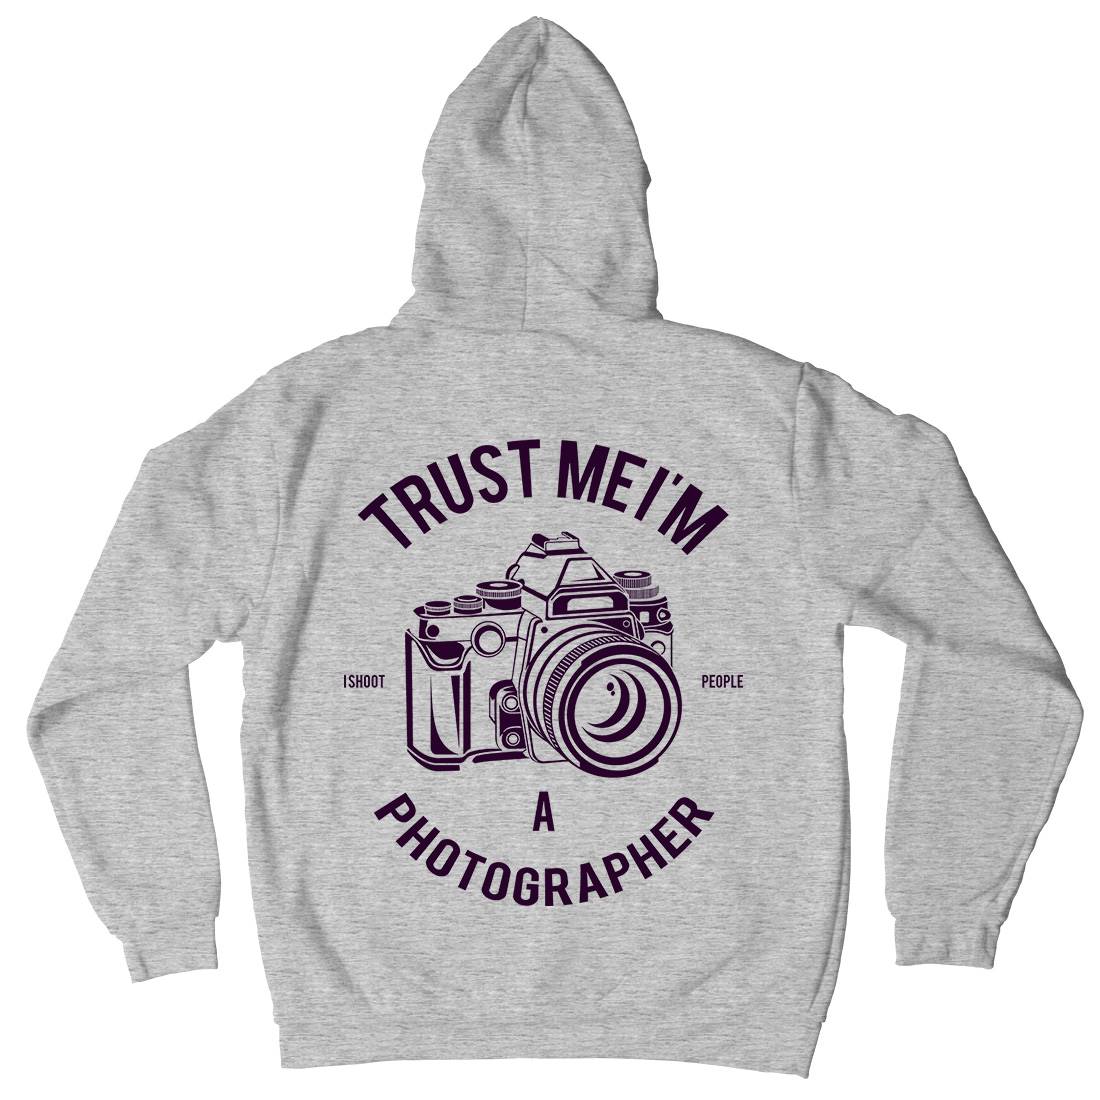 Photographer Mens Hoodie With Pocket Media A110